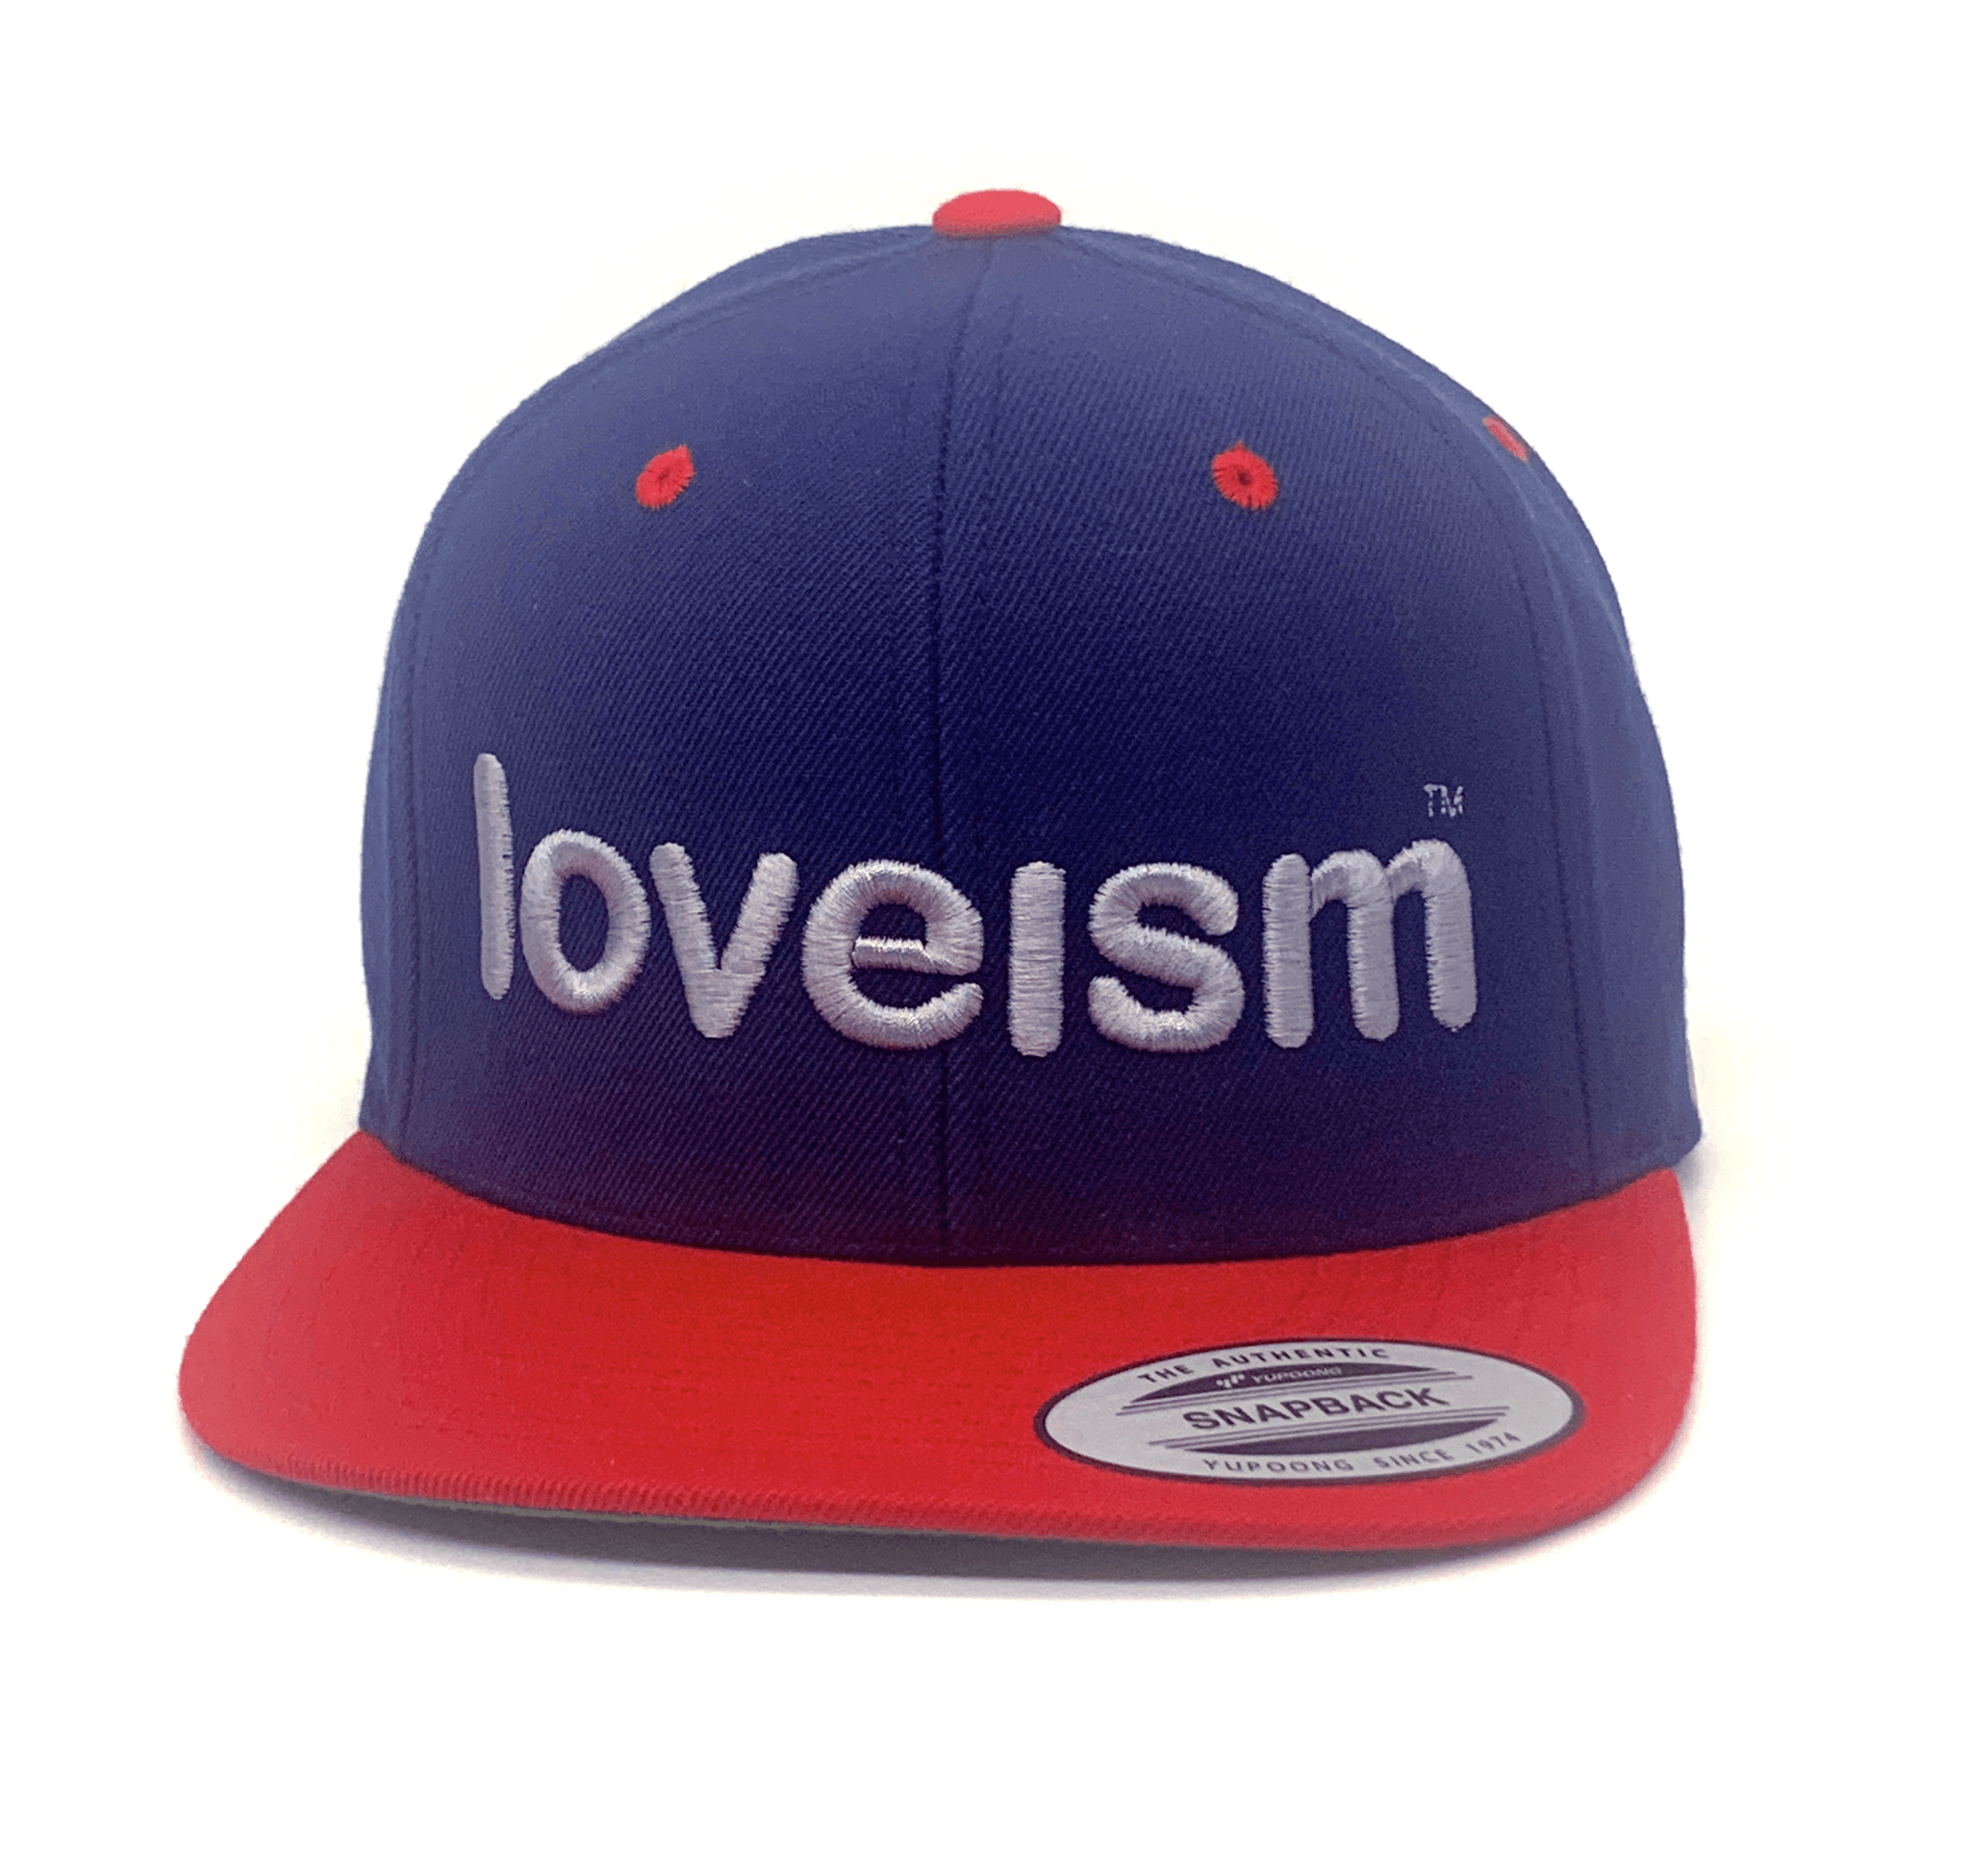 Loveism Embroidered Snapback Cap - loveism official